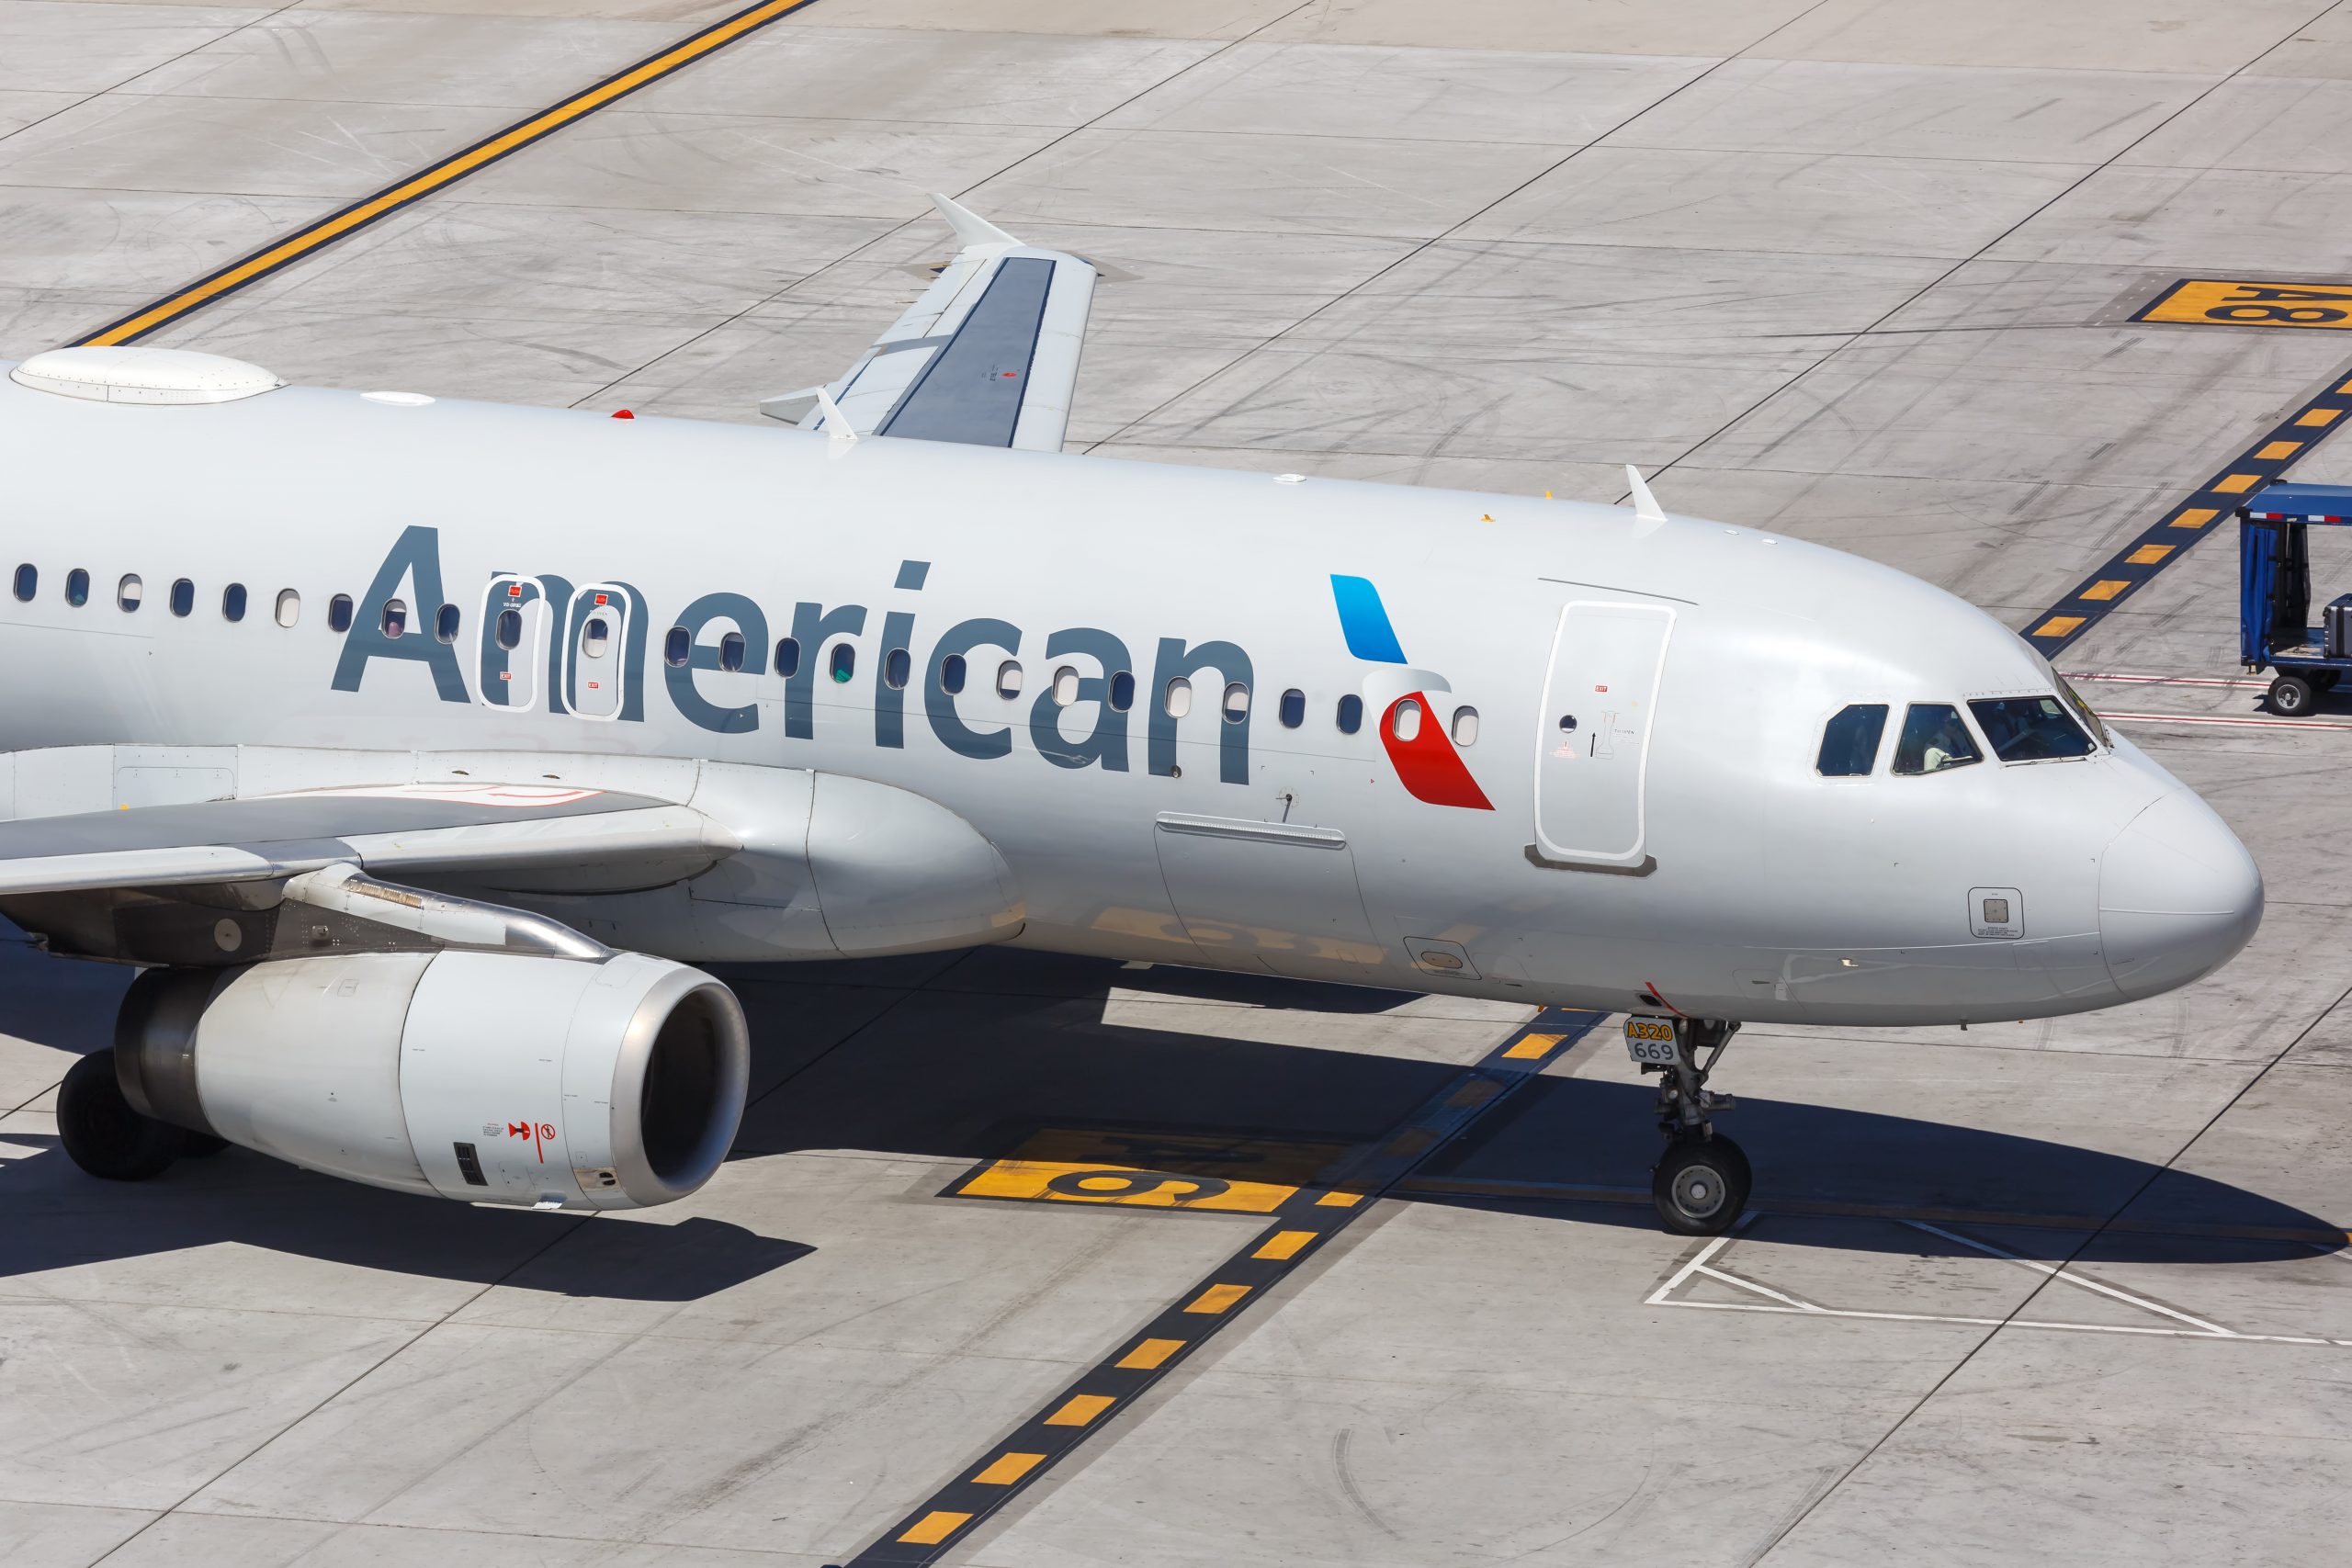 Aircraft Cleaner Swapped Life Vests On American Airlines Jet With Blocks Of  Cocaine